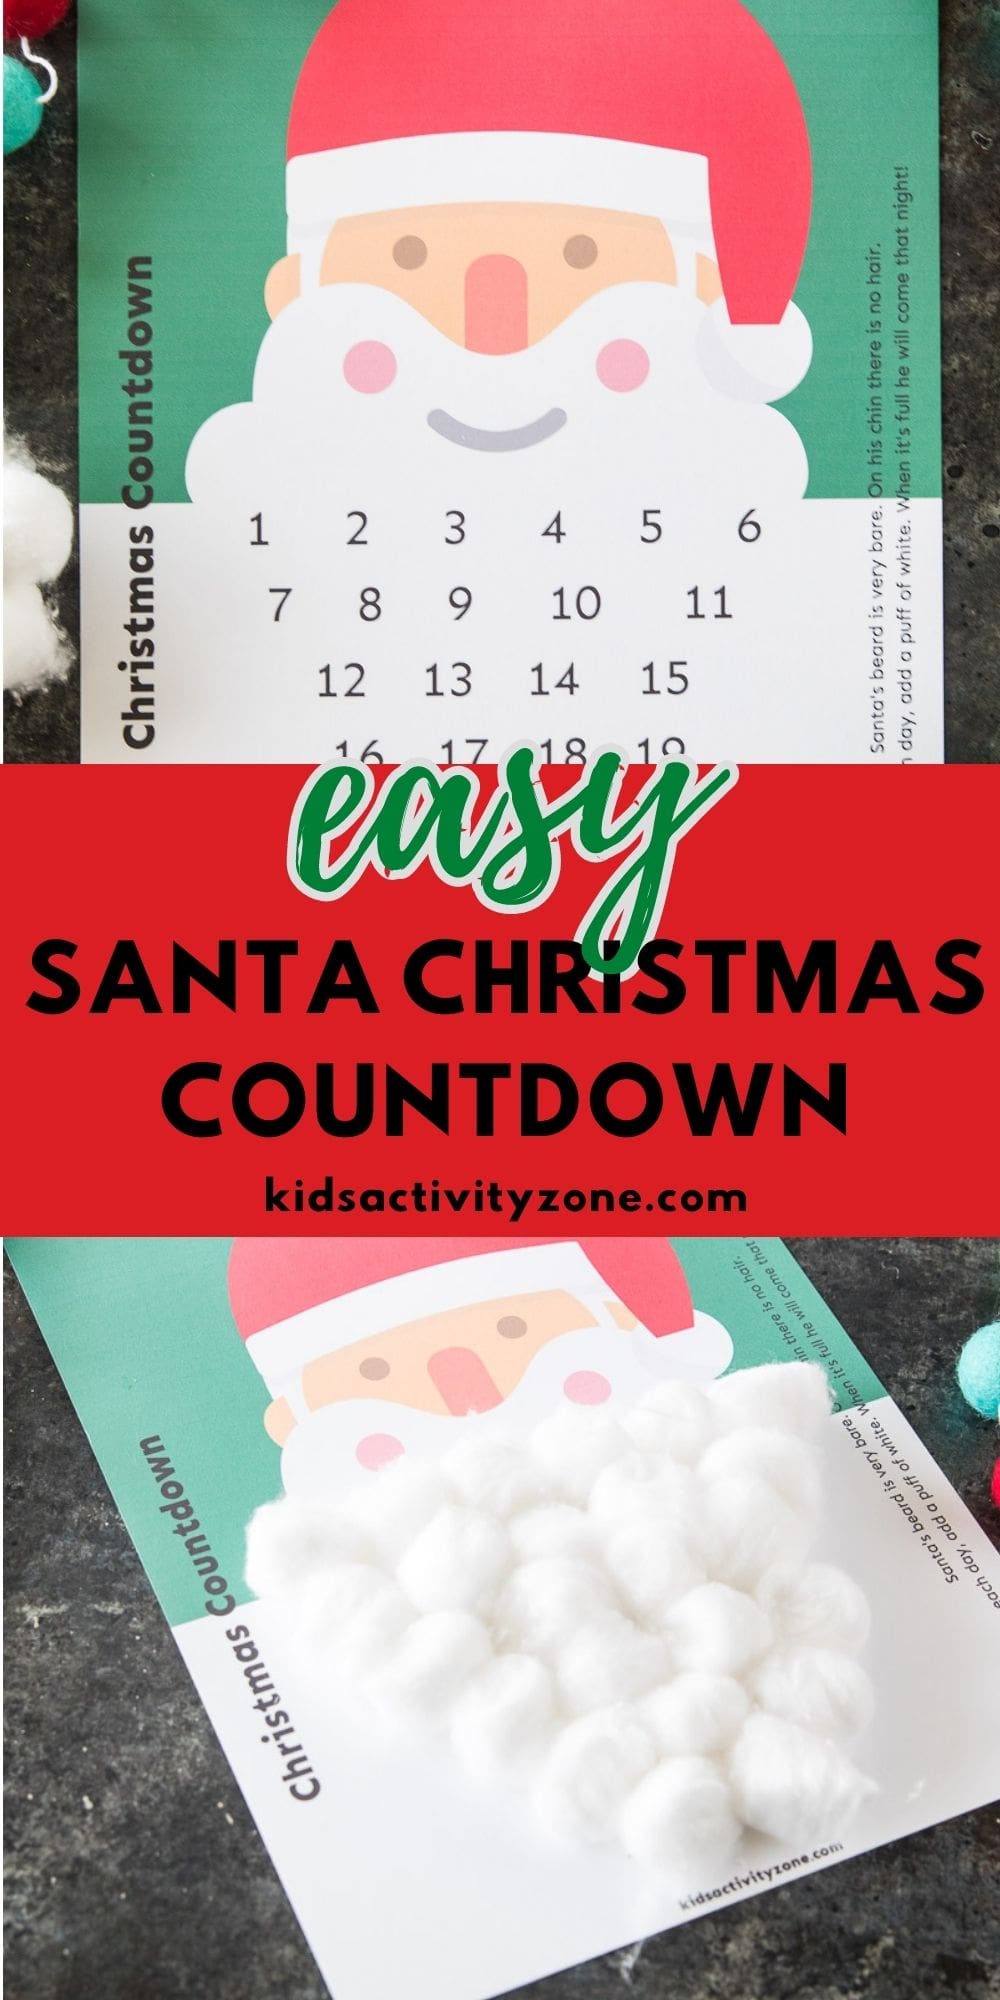 Need any easy Christmas Countdown? This Santa Christmas Countdown Printable is what you need! Just print it and put on a cotton ball for each day until Christmas Eve! Cute, simple and easy!